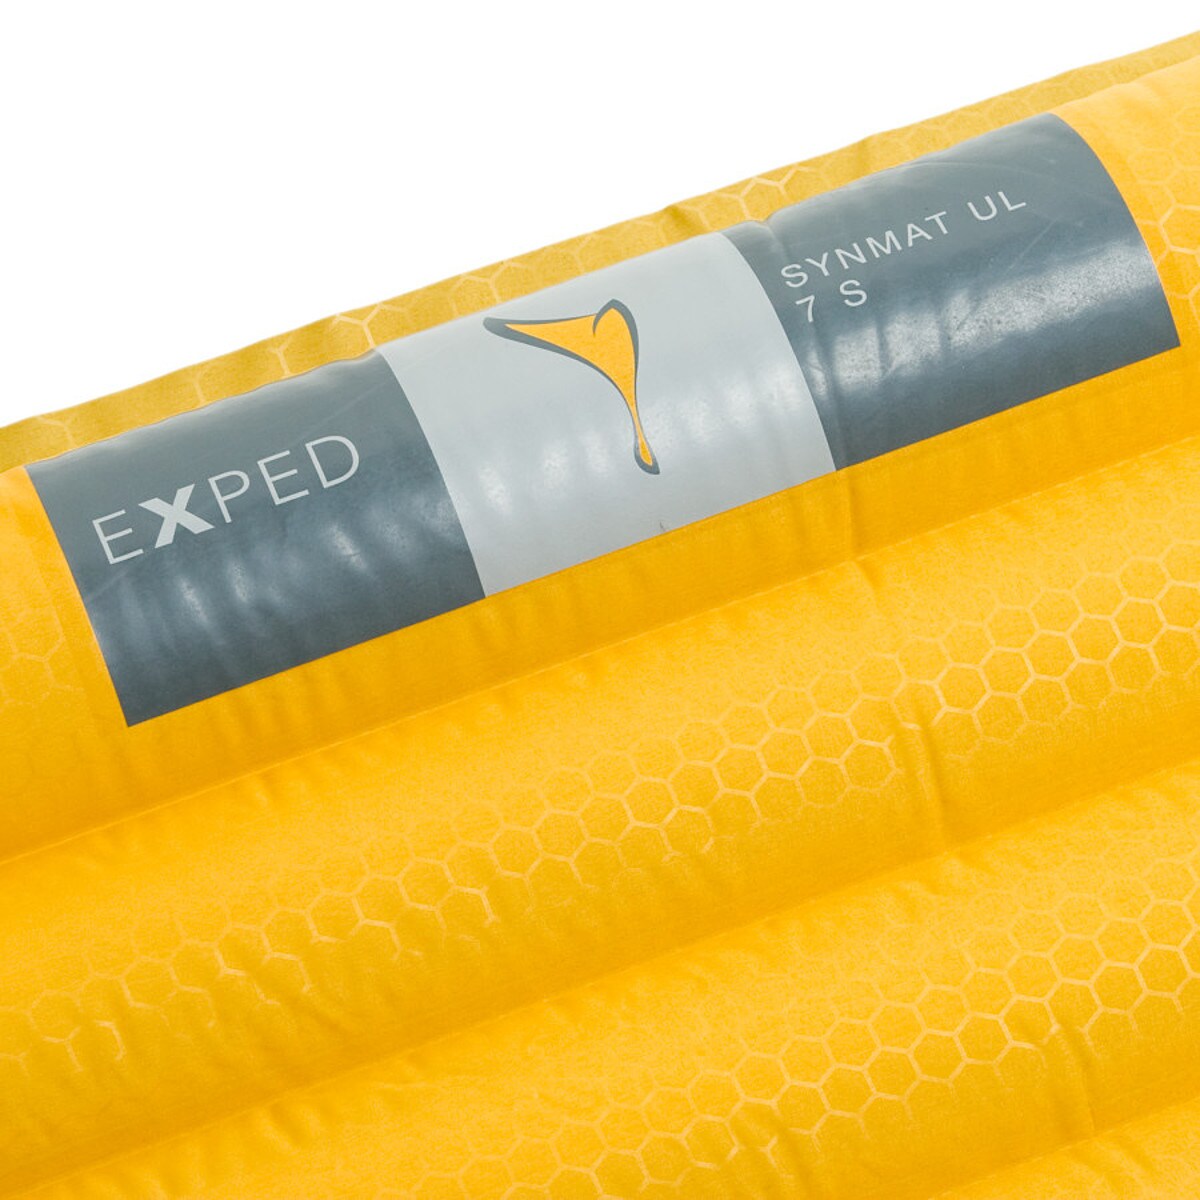 Exped Synmat UL Winter - Sleeping mat, Buy online